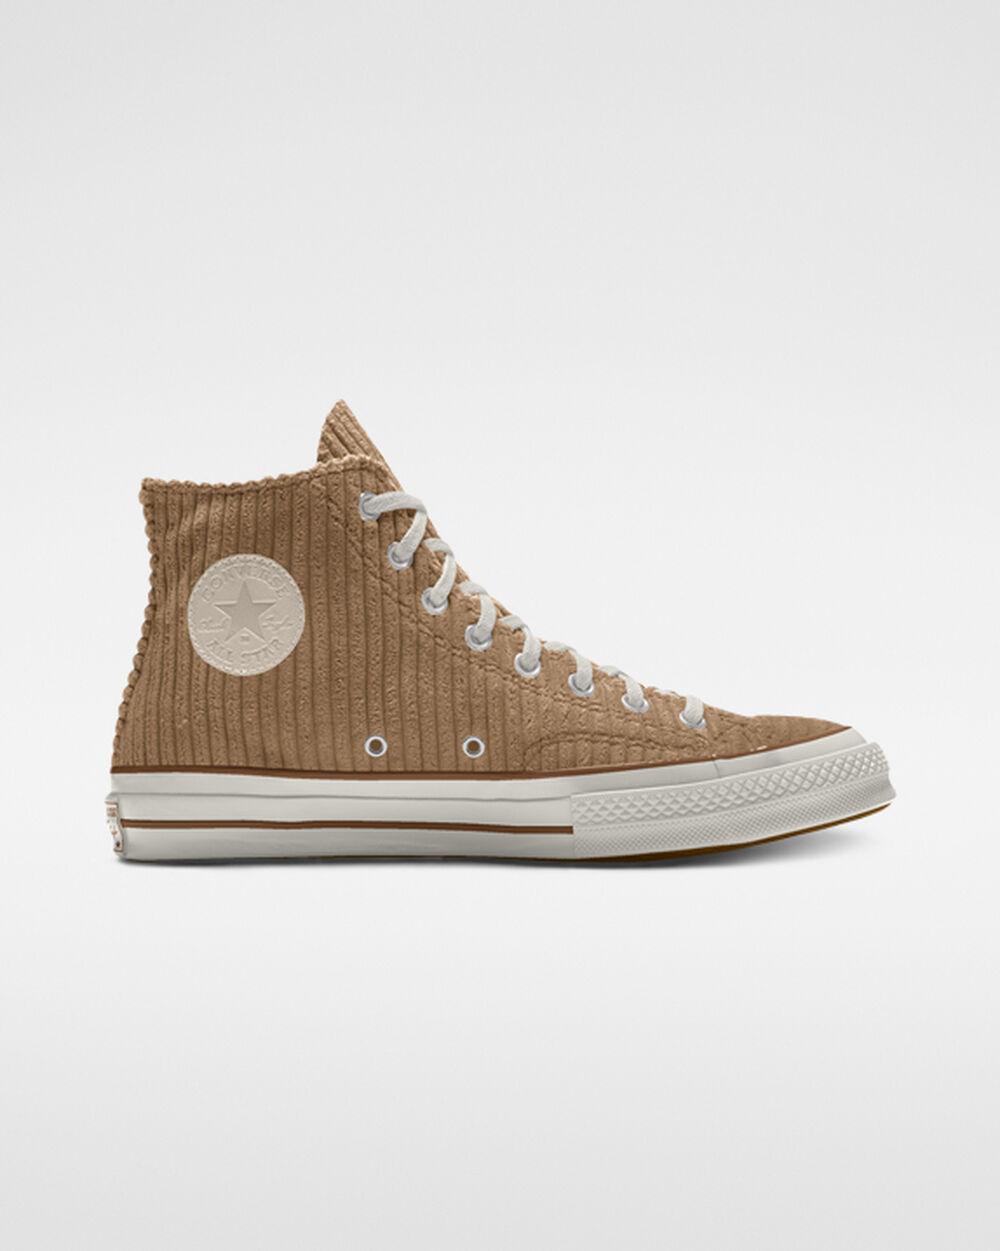 Converse Custom Chuck 70 Corduroy By You in Brown for Men - Lyst